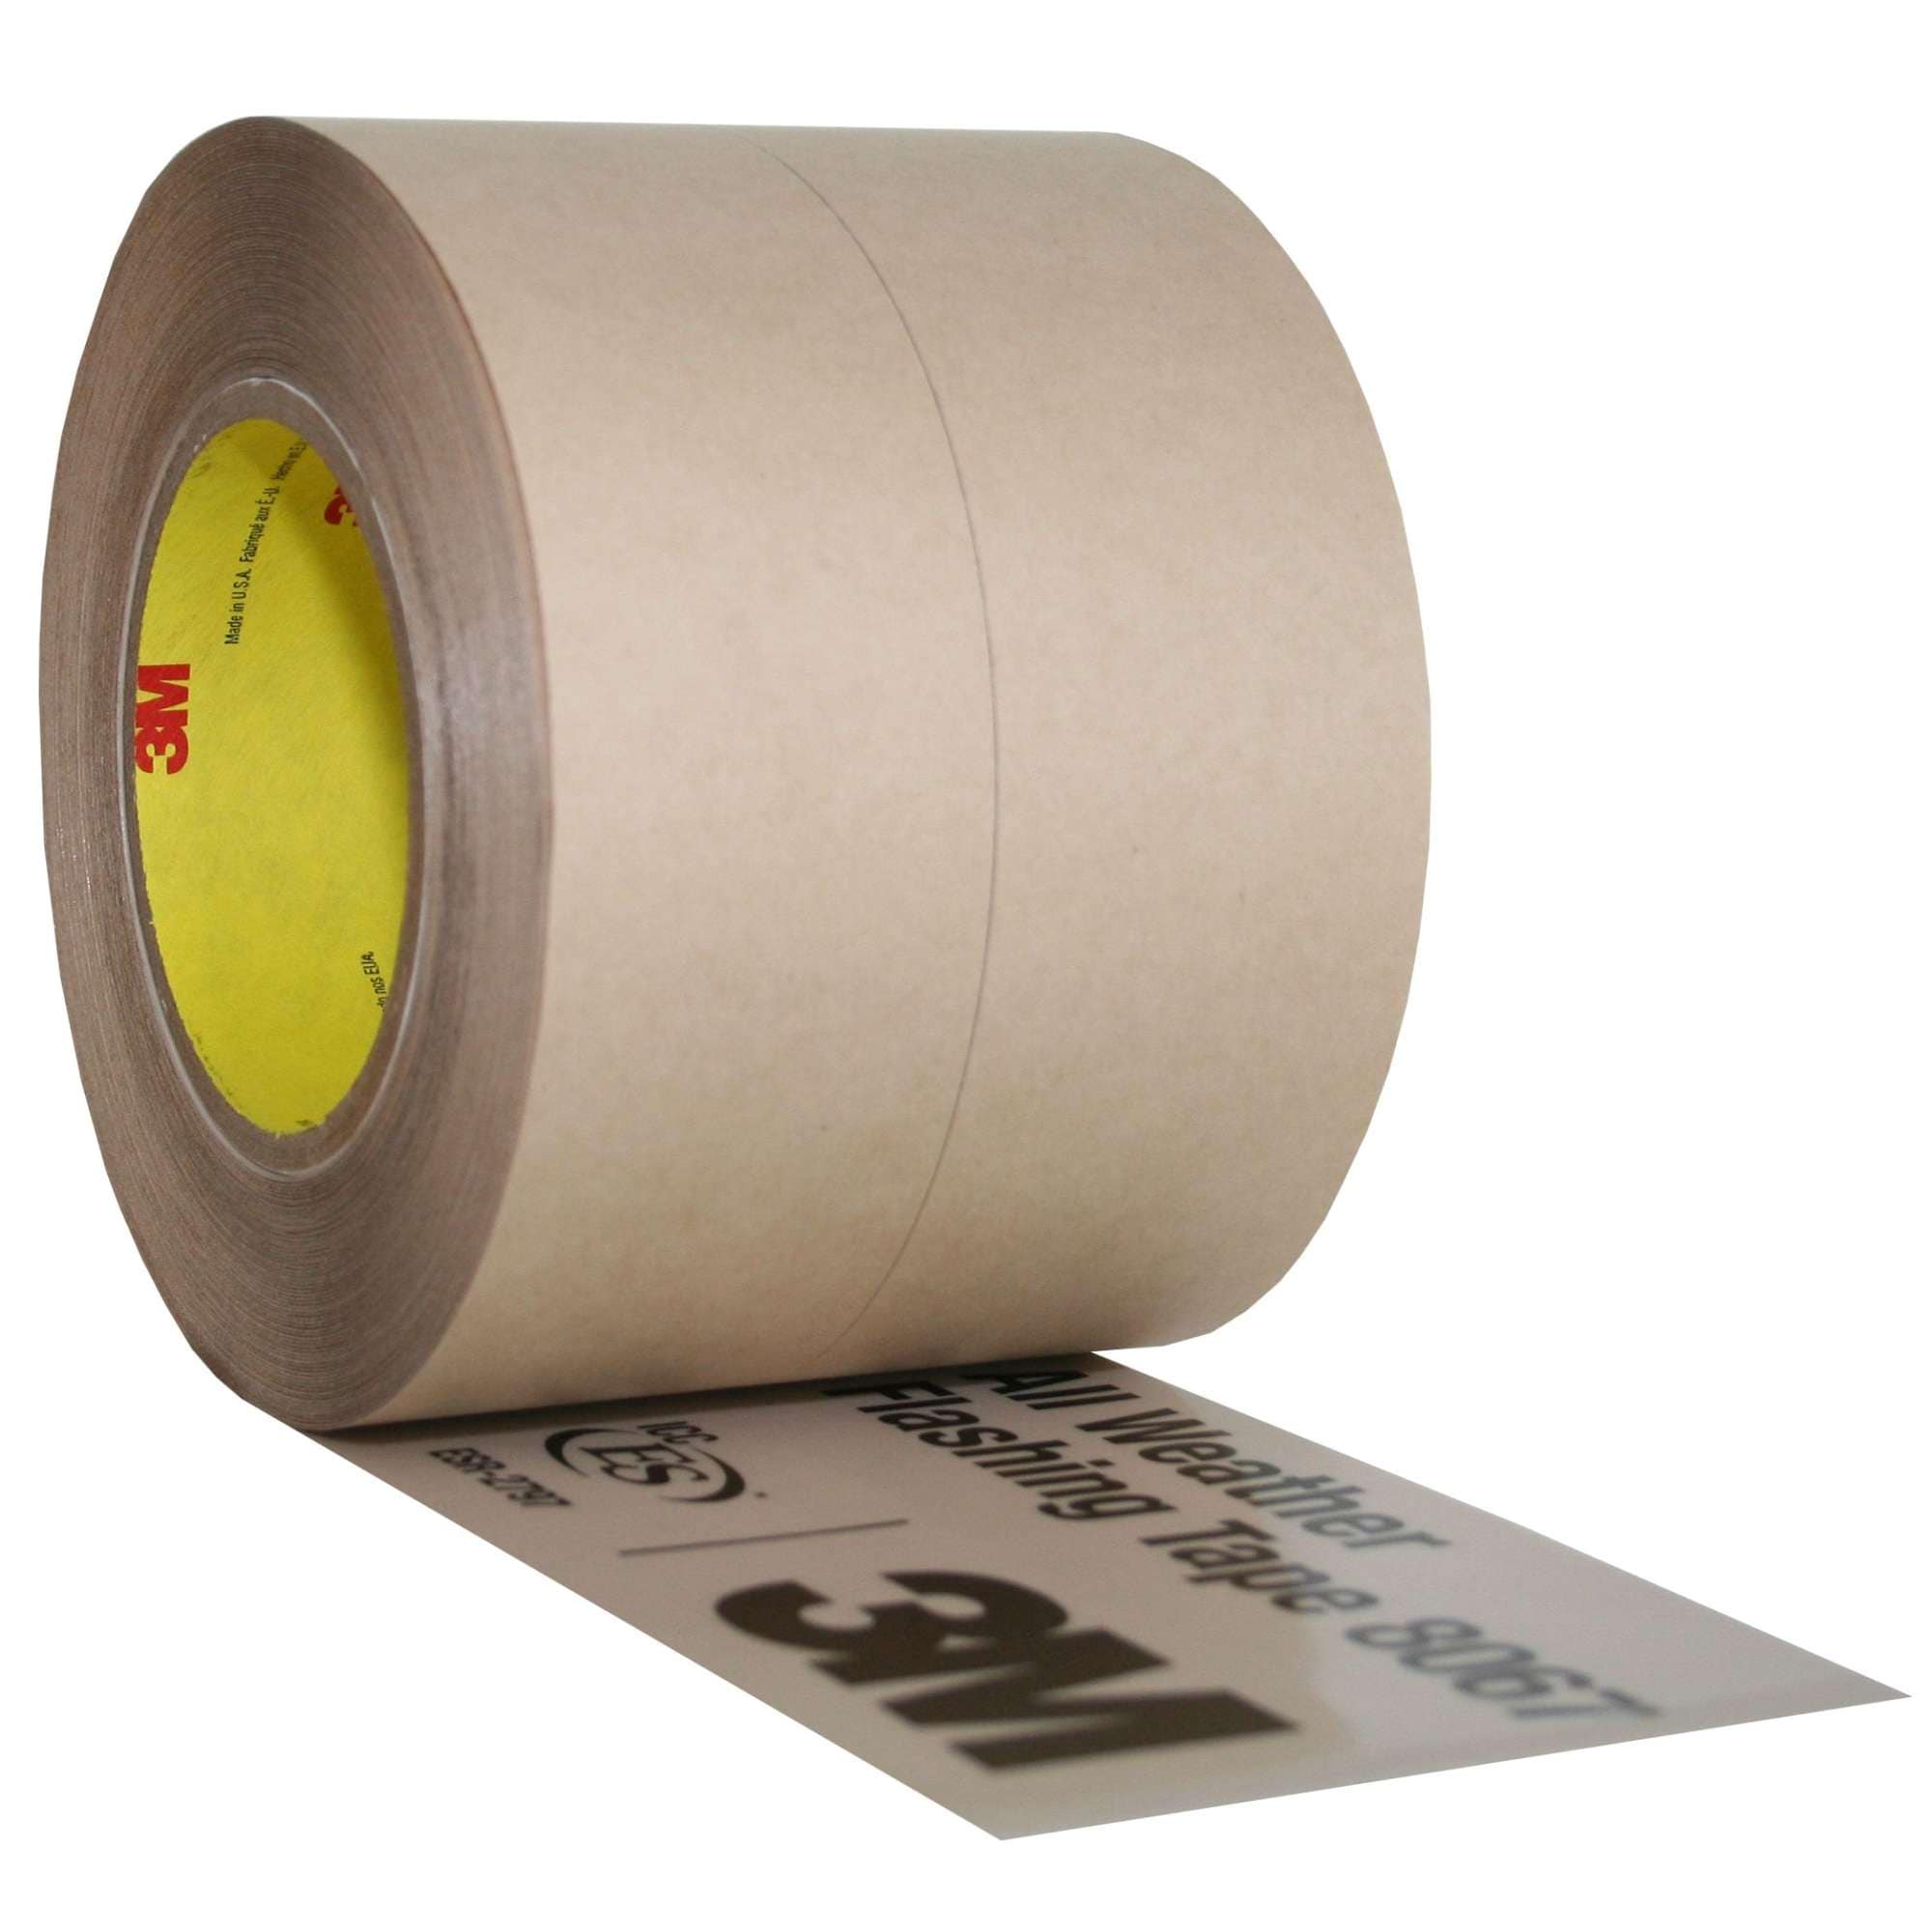 Flash Tape Clothing Adhesive Tape - 20 ft Roll